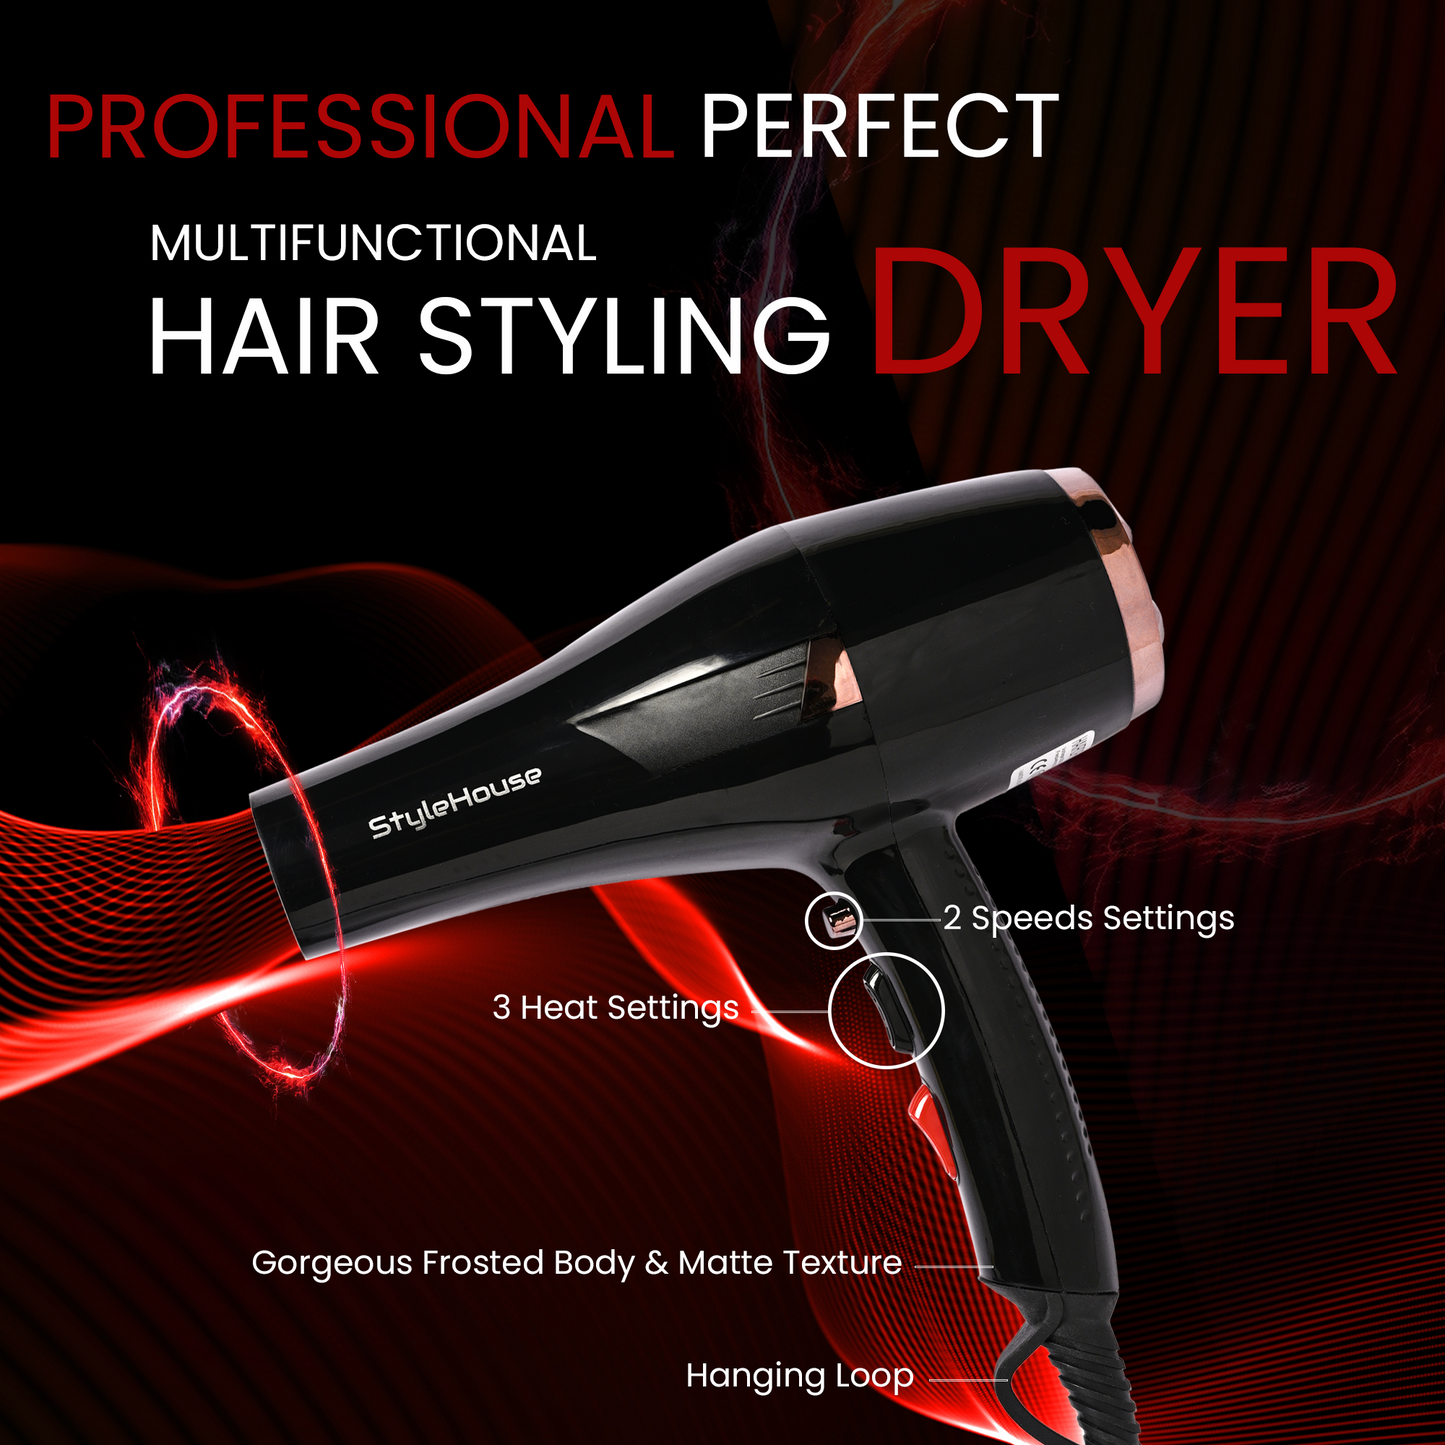 StyleHouse X9 Professional Hair Dryer for Women & Men, 2500 Watt, Long Cord, Hot and Cold Air